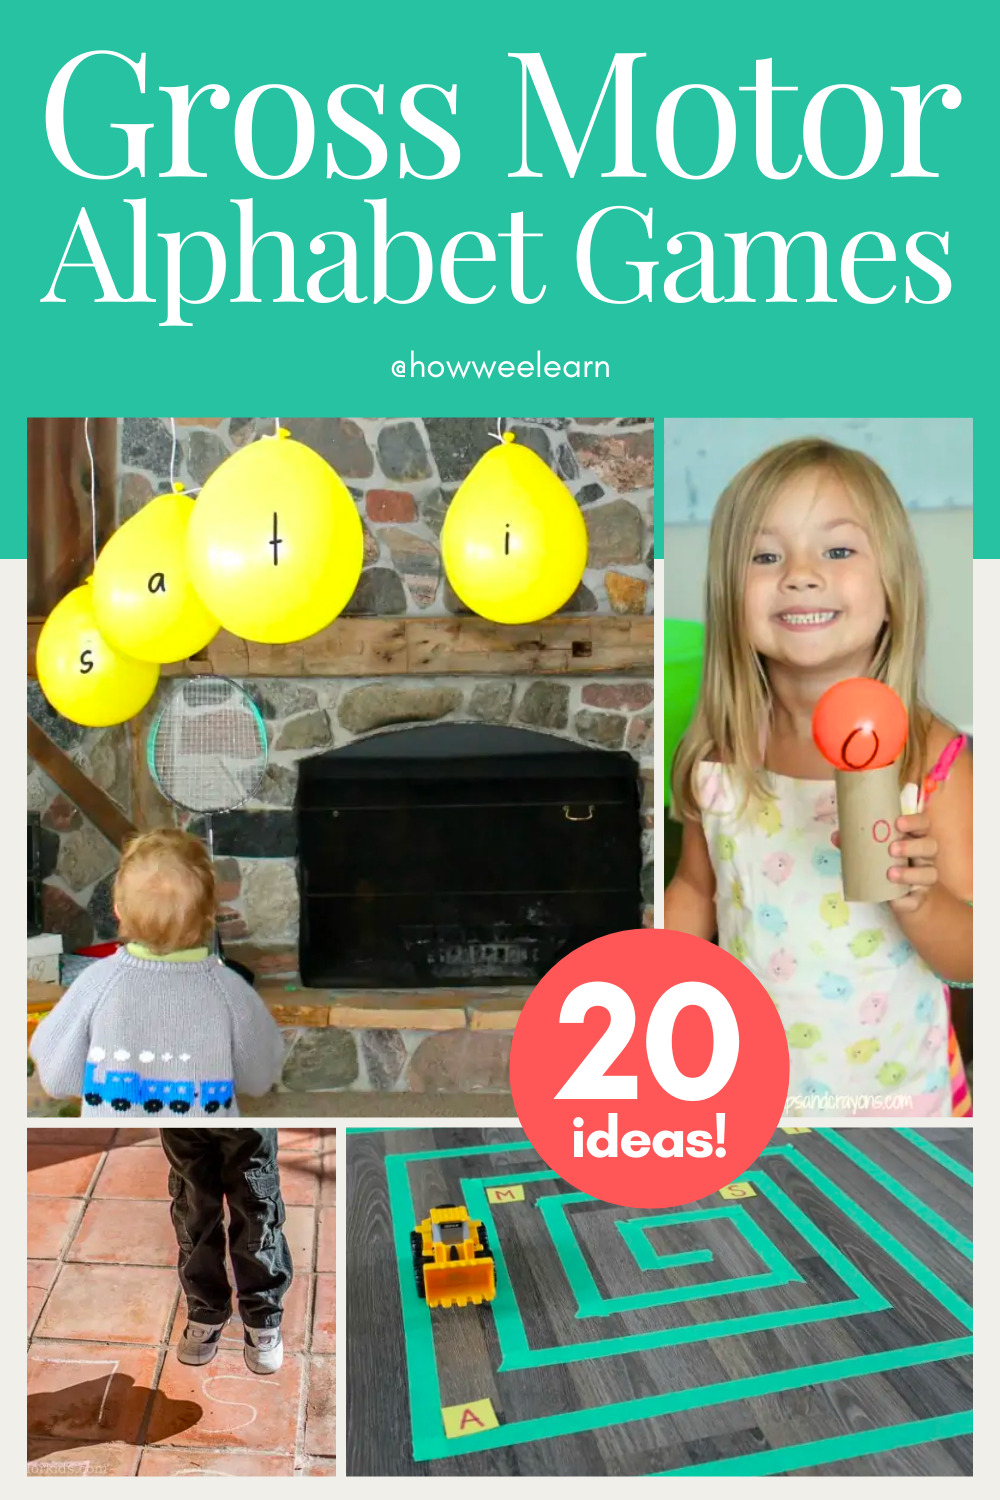 Gross Motor Alphabet Games: 20 Ideas! These alphabet games are perfect for active kids! Great activities for practicing letters and sounds with preschoolers.